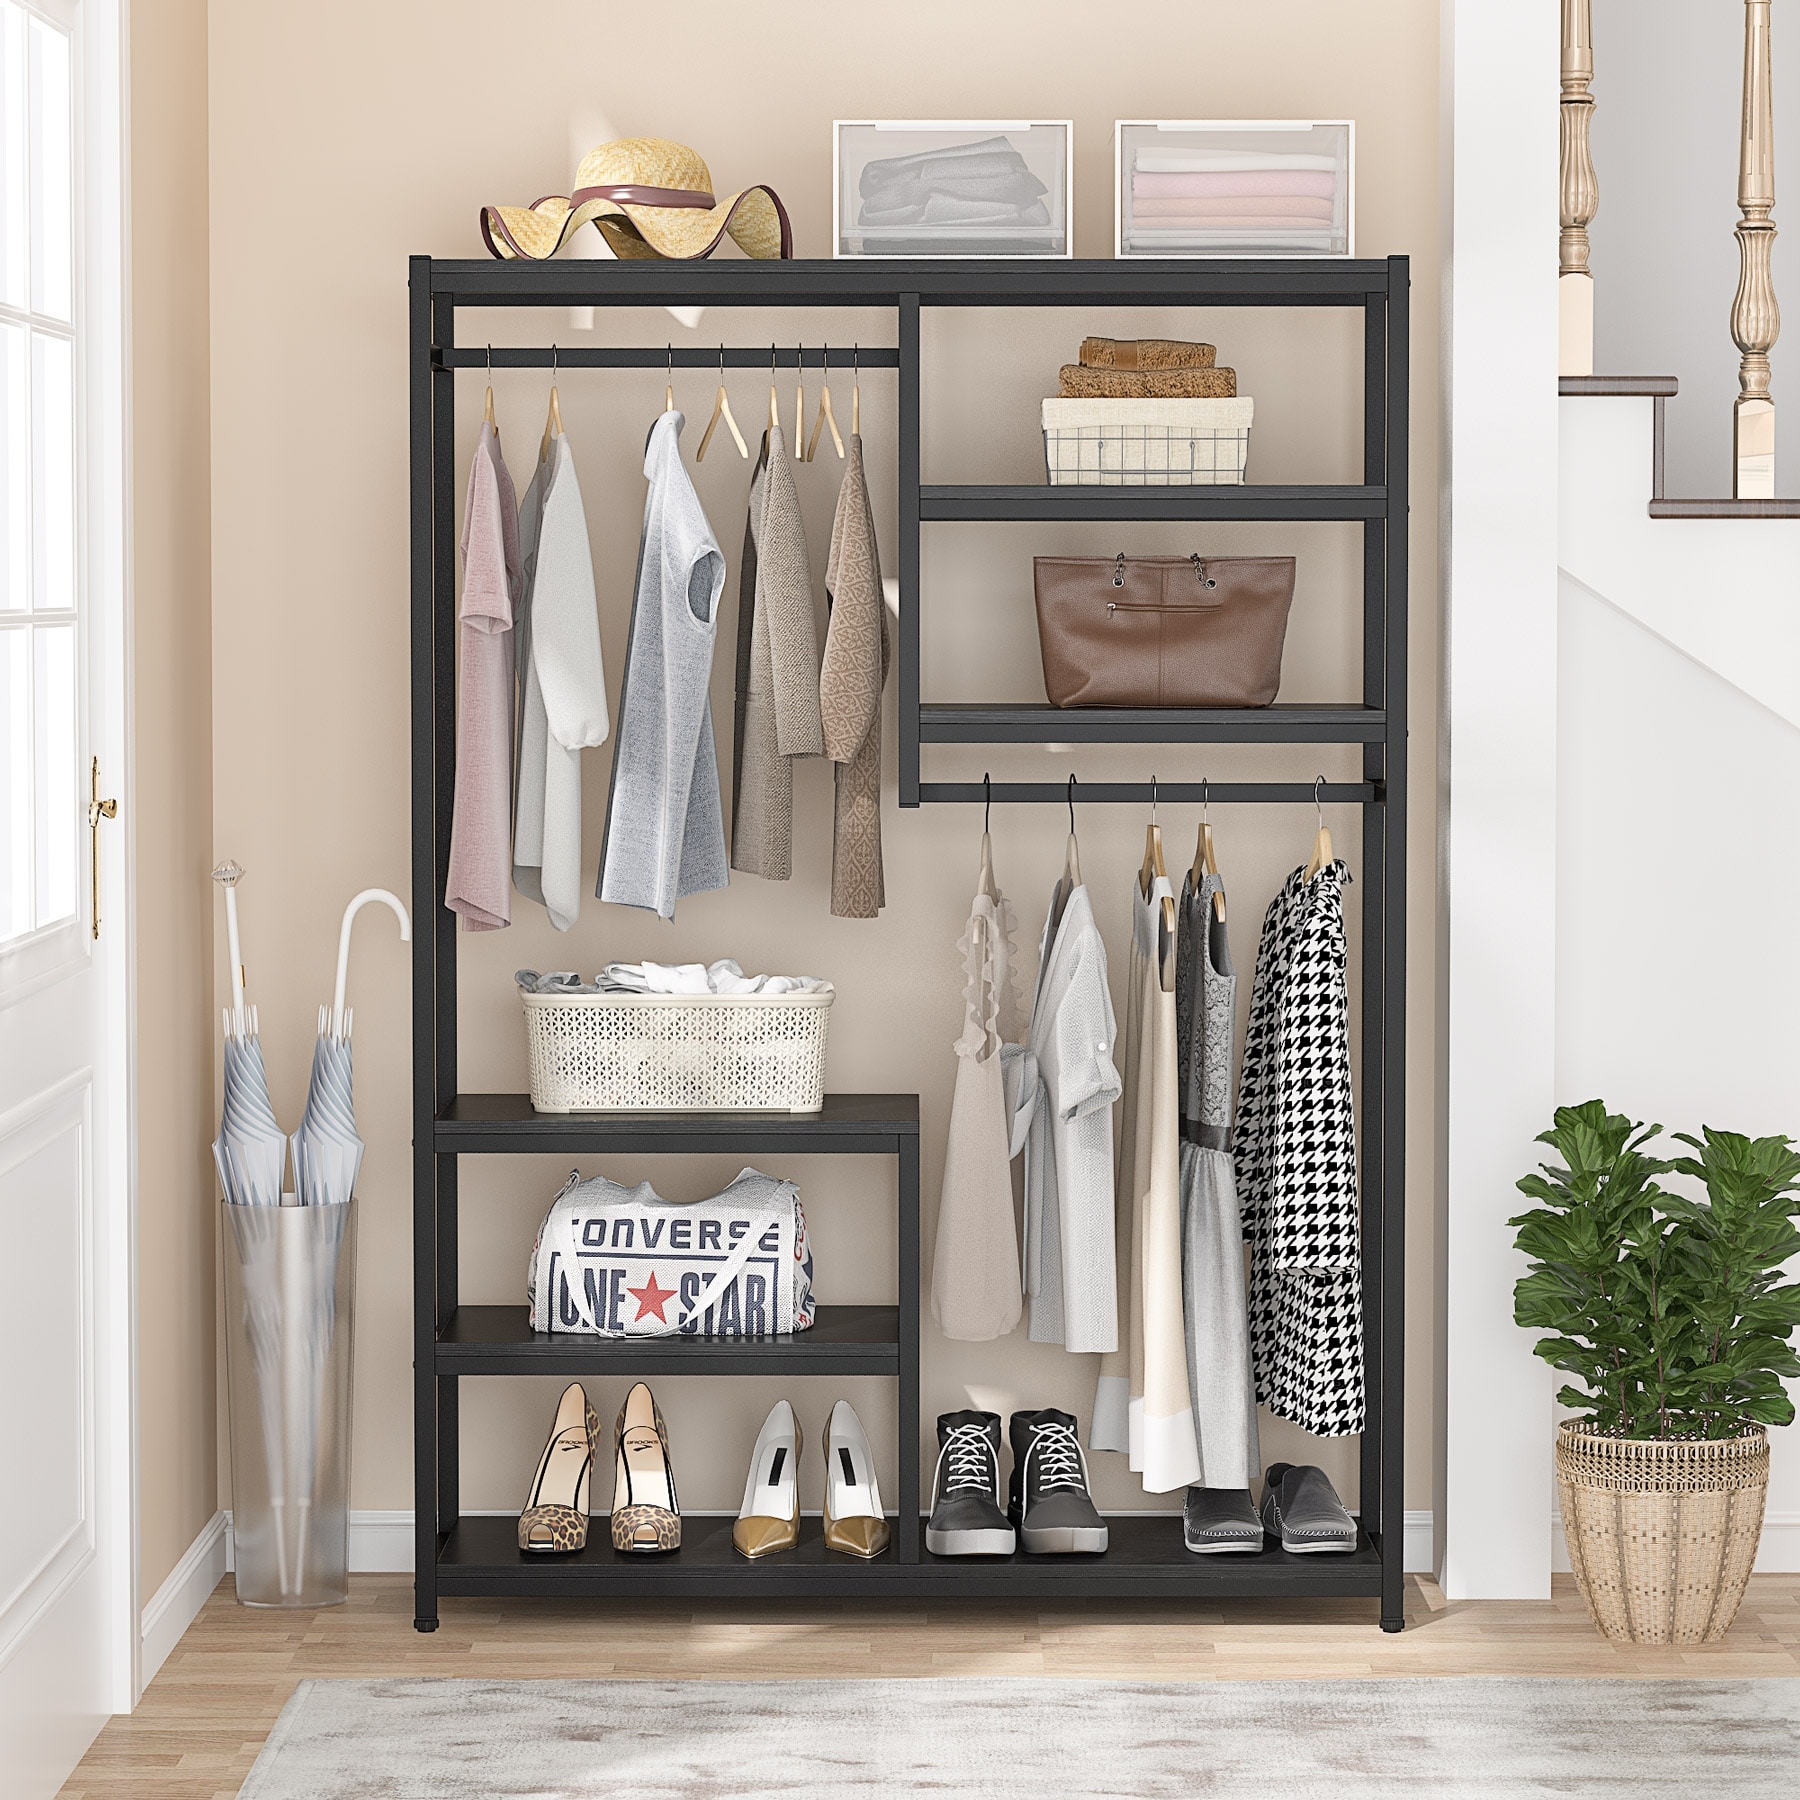 https://ak1.ostkcdn.com/images/products/is/images/direct/8580f771b8aabdadc546542e5238597e226685bb/Free-Standing-Closet-Organizer-Double-Hanging-Rod-Clothes-Garment-Racks.jpg